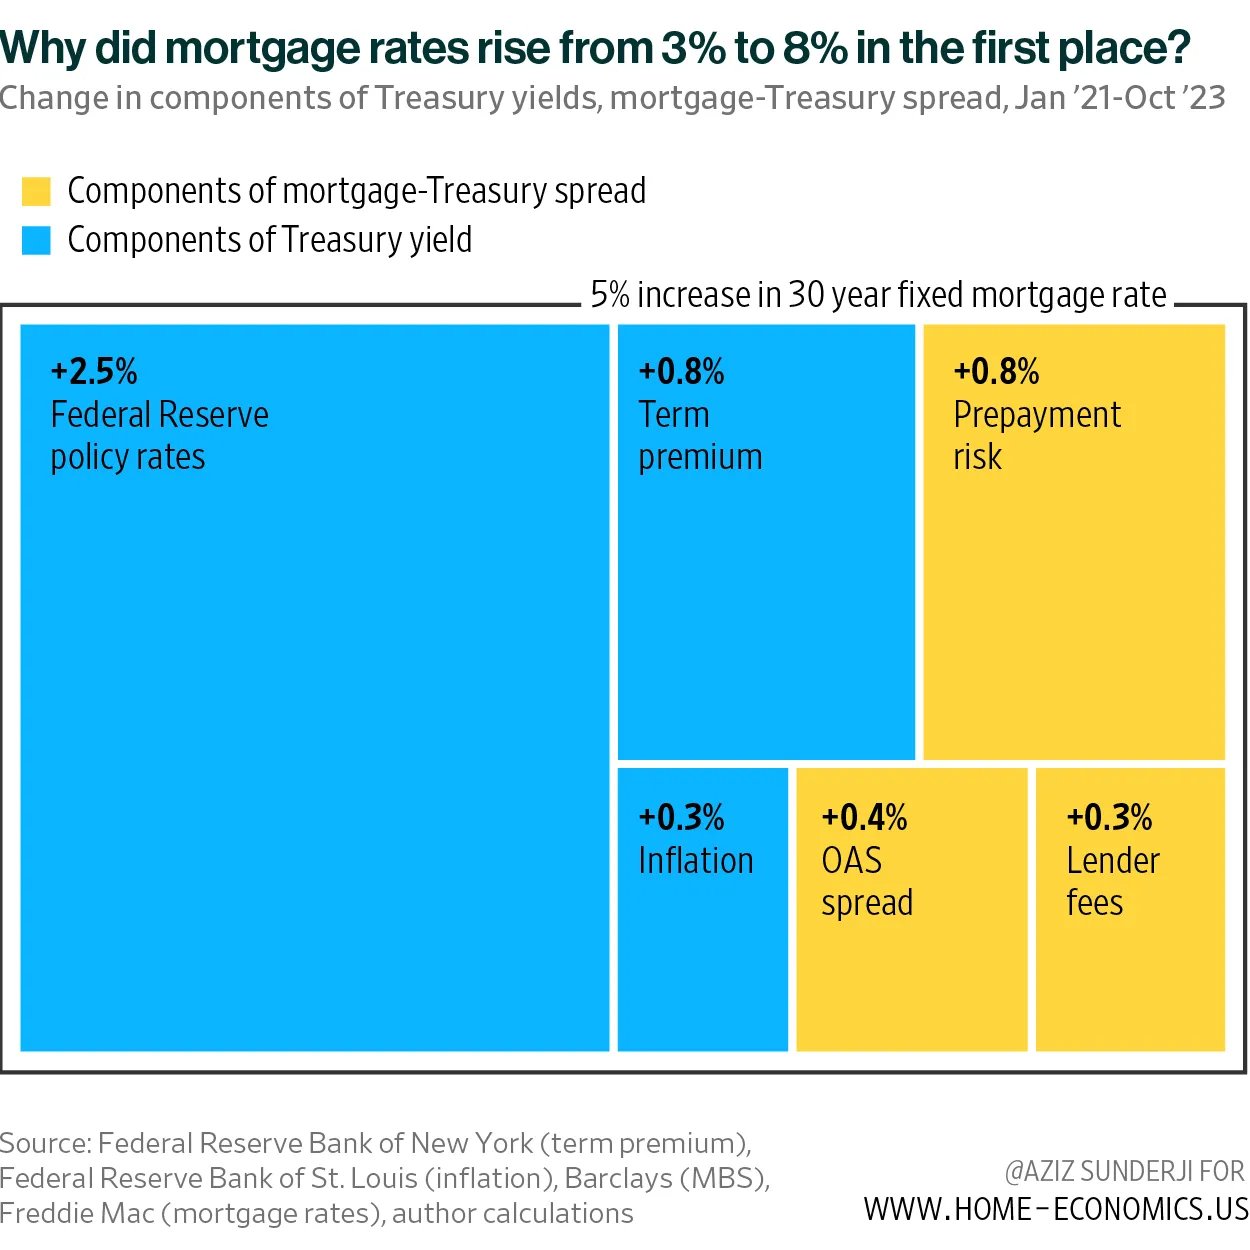 Components that caused mortgage rates to increase from 3% to 8% since 2022